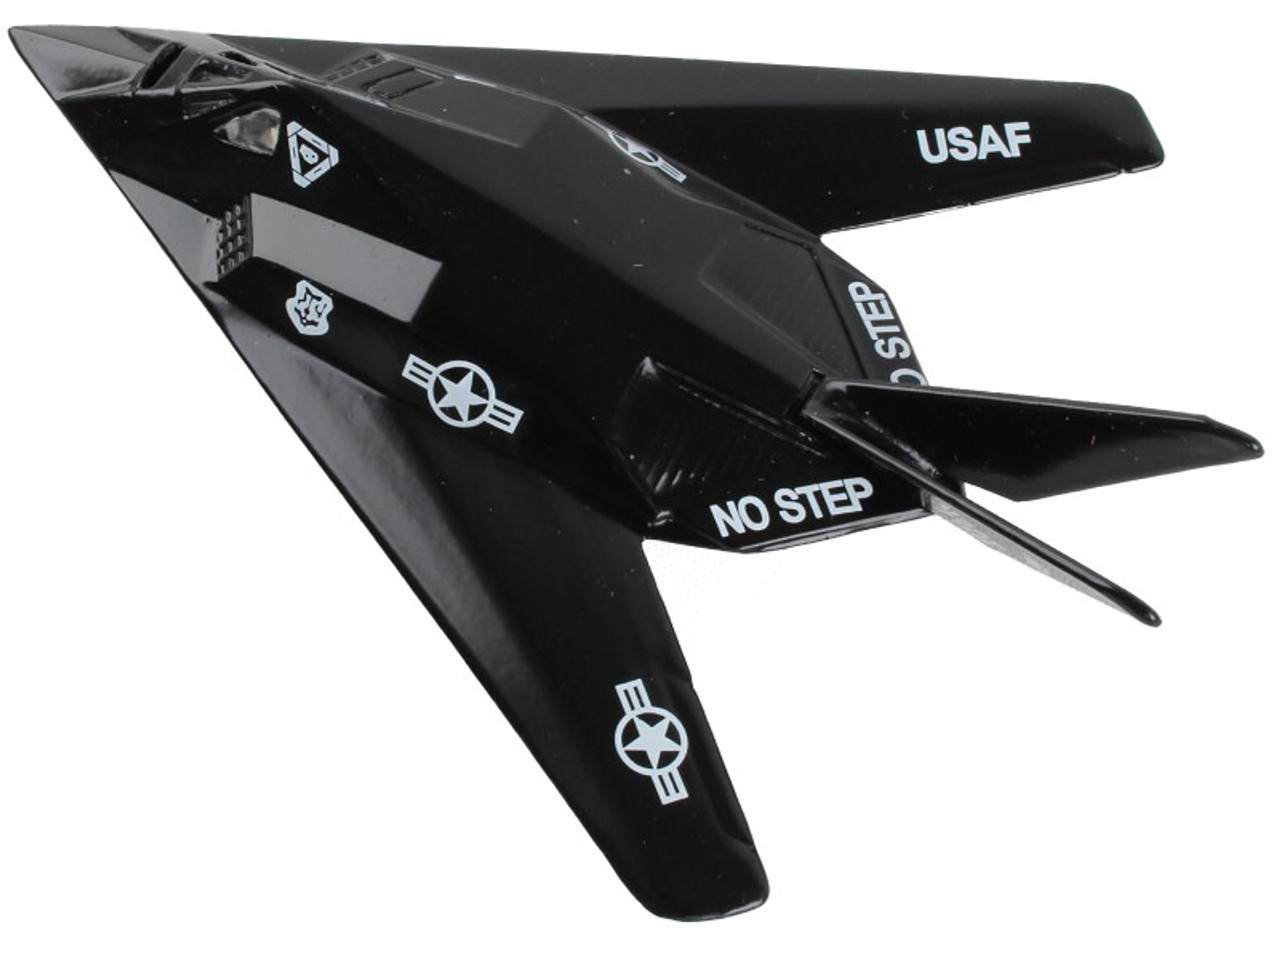 Lockheed F-117 Nighthawk Stealth Aircraft Black "United States Air Force" with Runway Section Diecast Model Airplane by Runway24